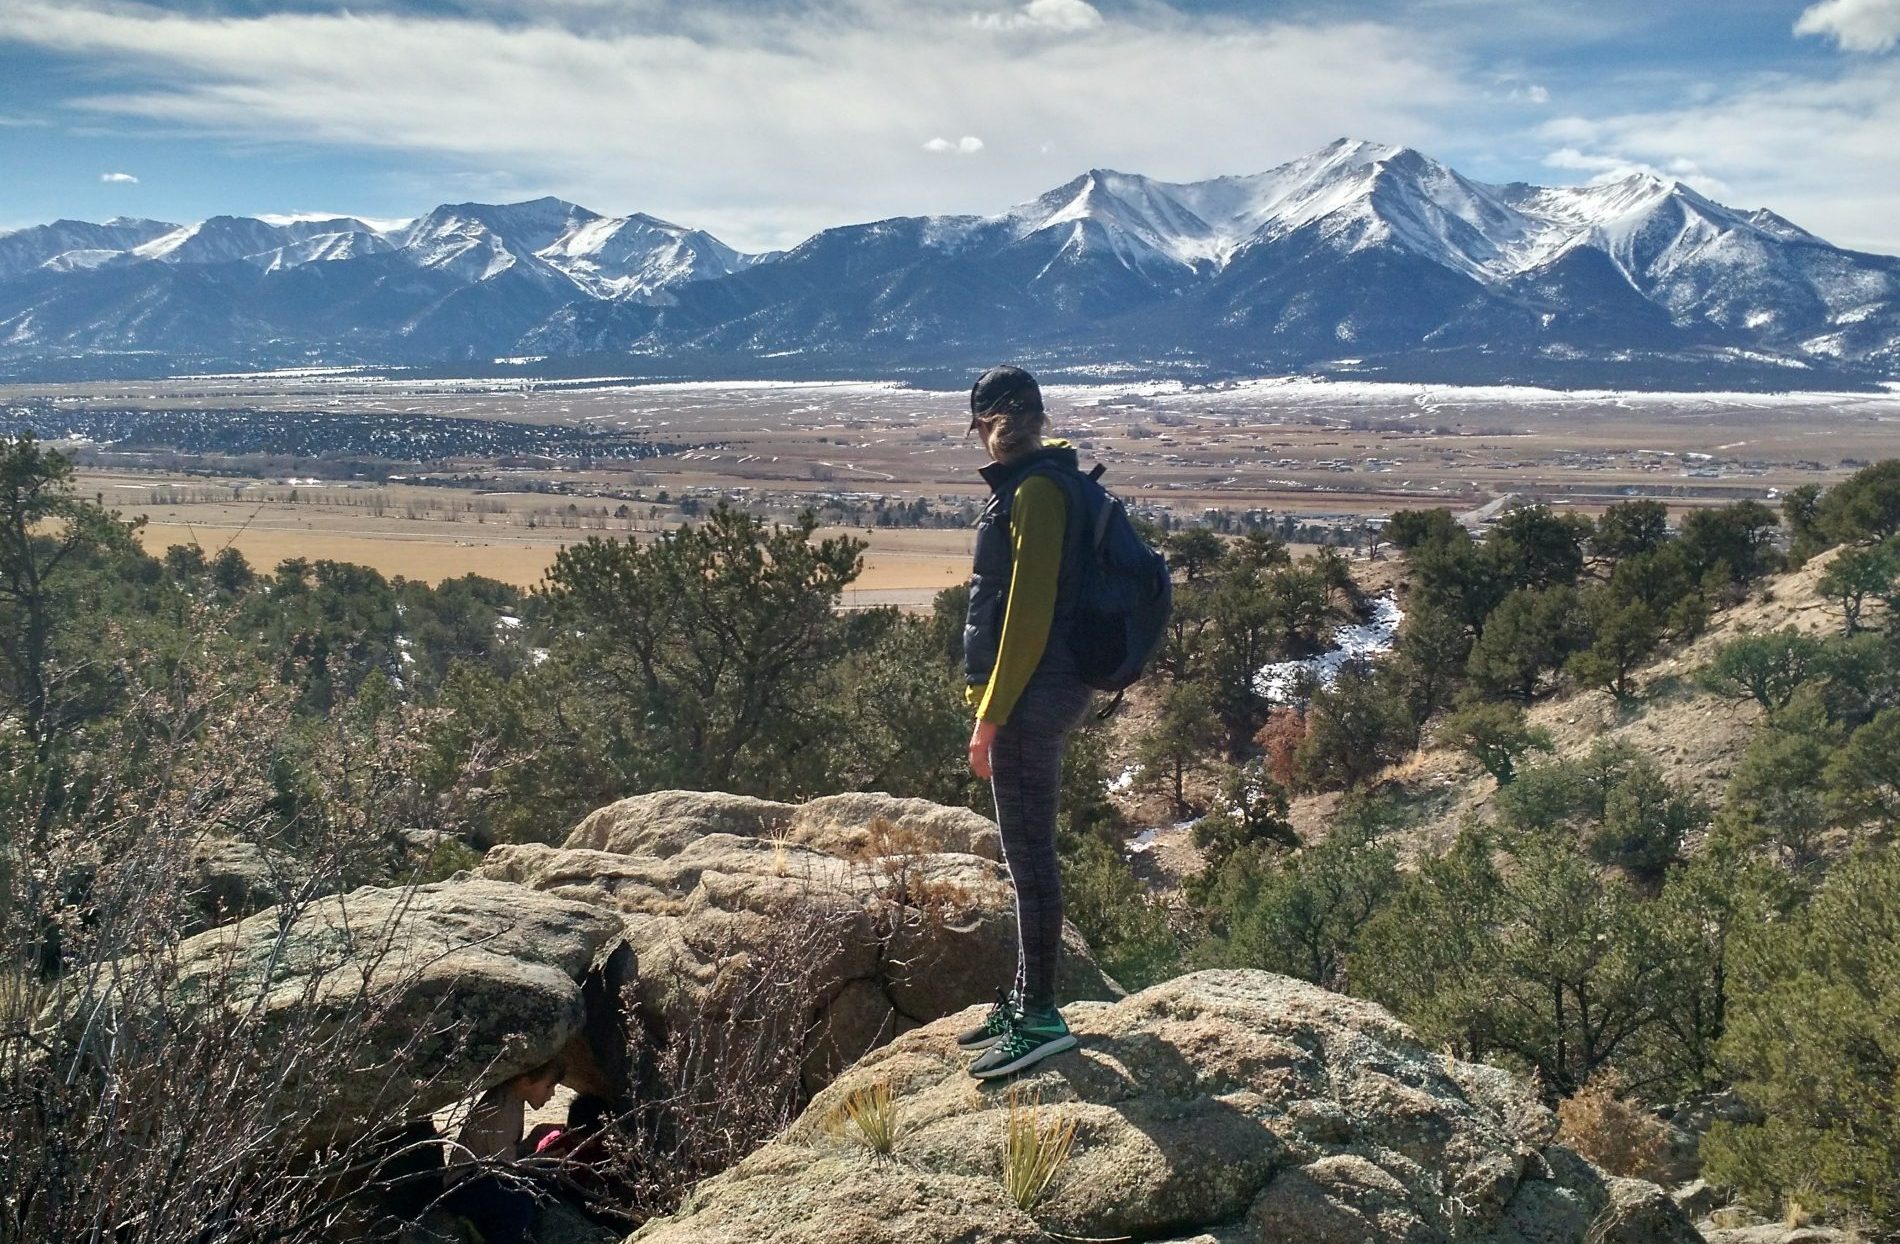 Hiker stands to take in Colorado Mountains scenery during hiking and whitewater rafting adventures